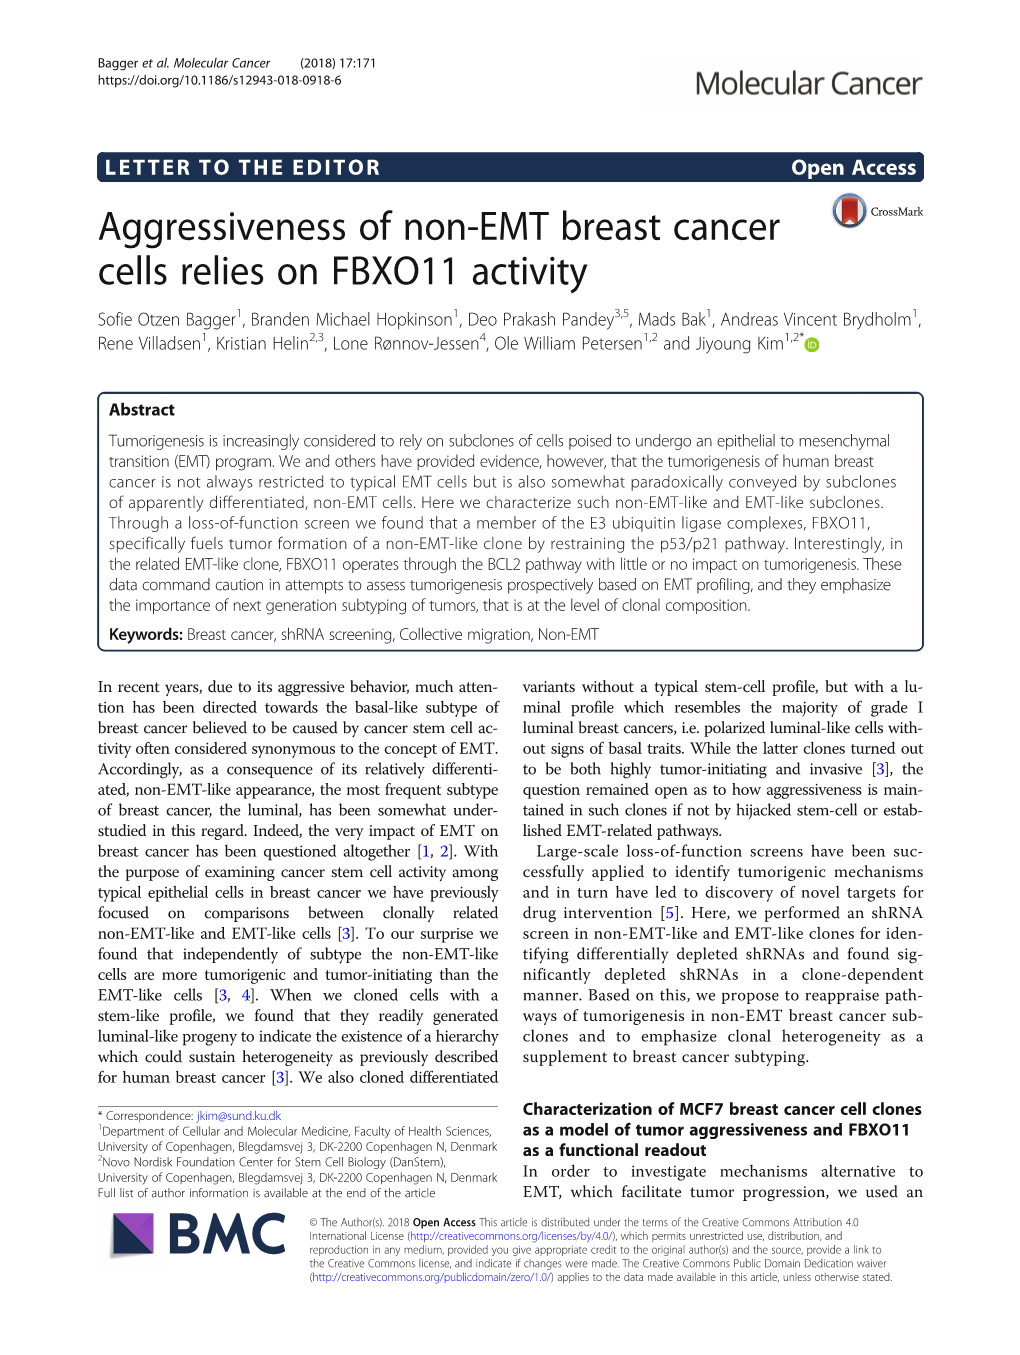 Aggressiveness of Non-EMT Breast Cancer Cells Relies on FBXO11 Activity